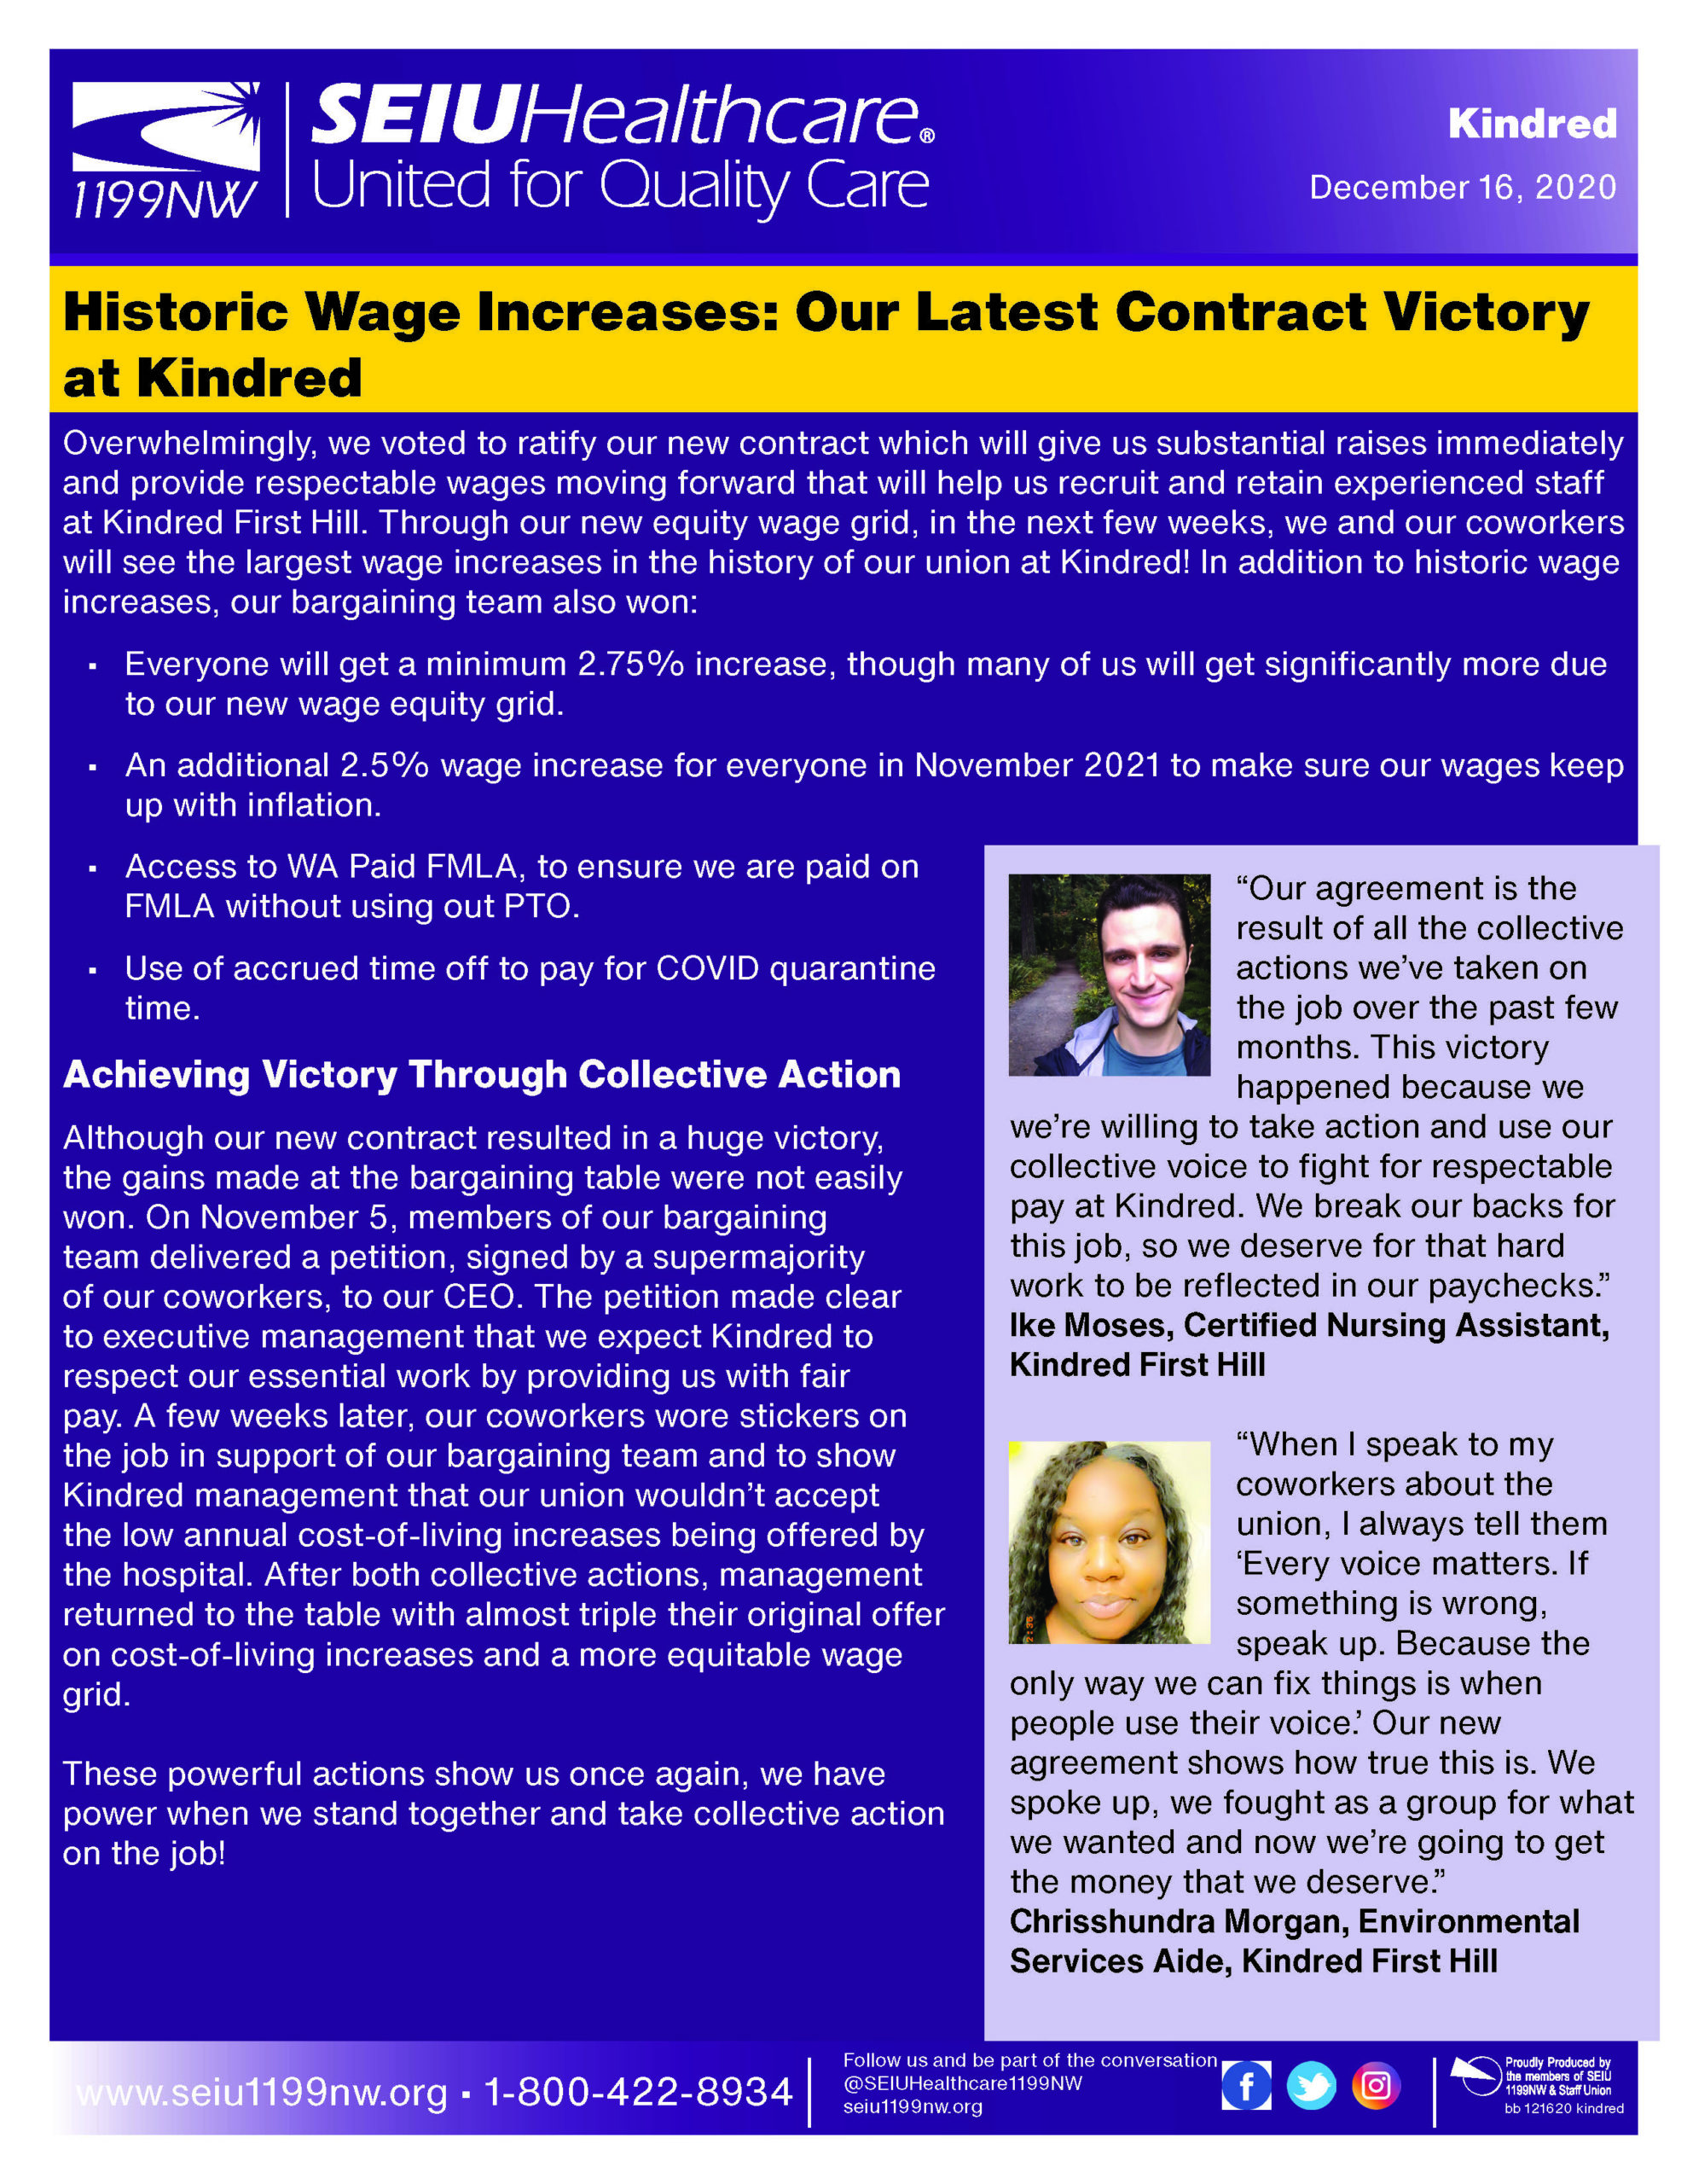 Historic Wage Increases: Our Latest Contract Victory at Kindred